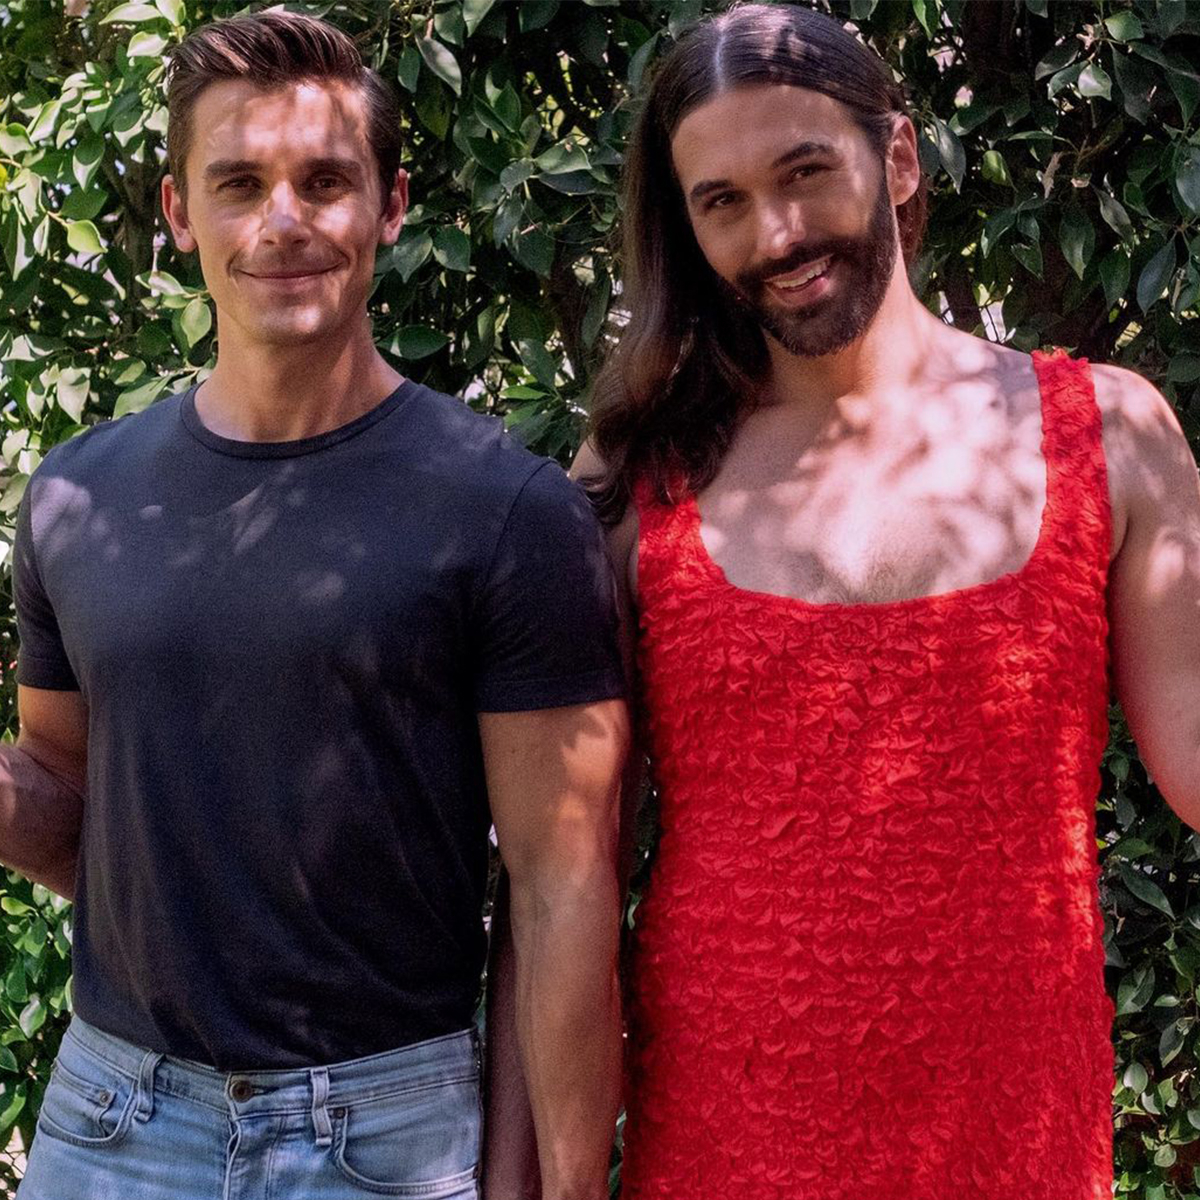 JVN and Antoni Porowski Tease Fans About Being “Finally Together”